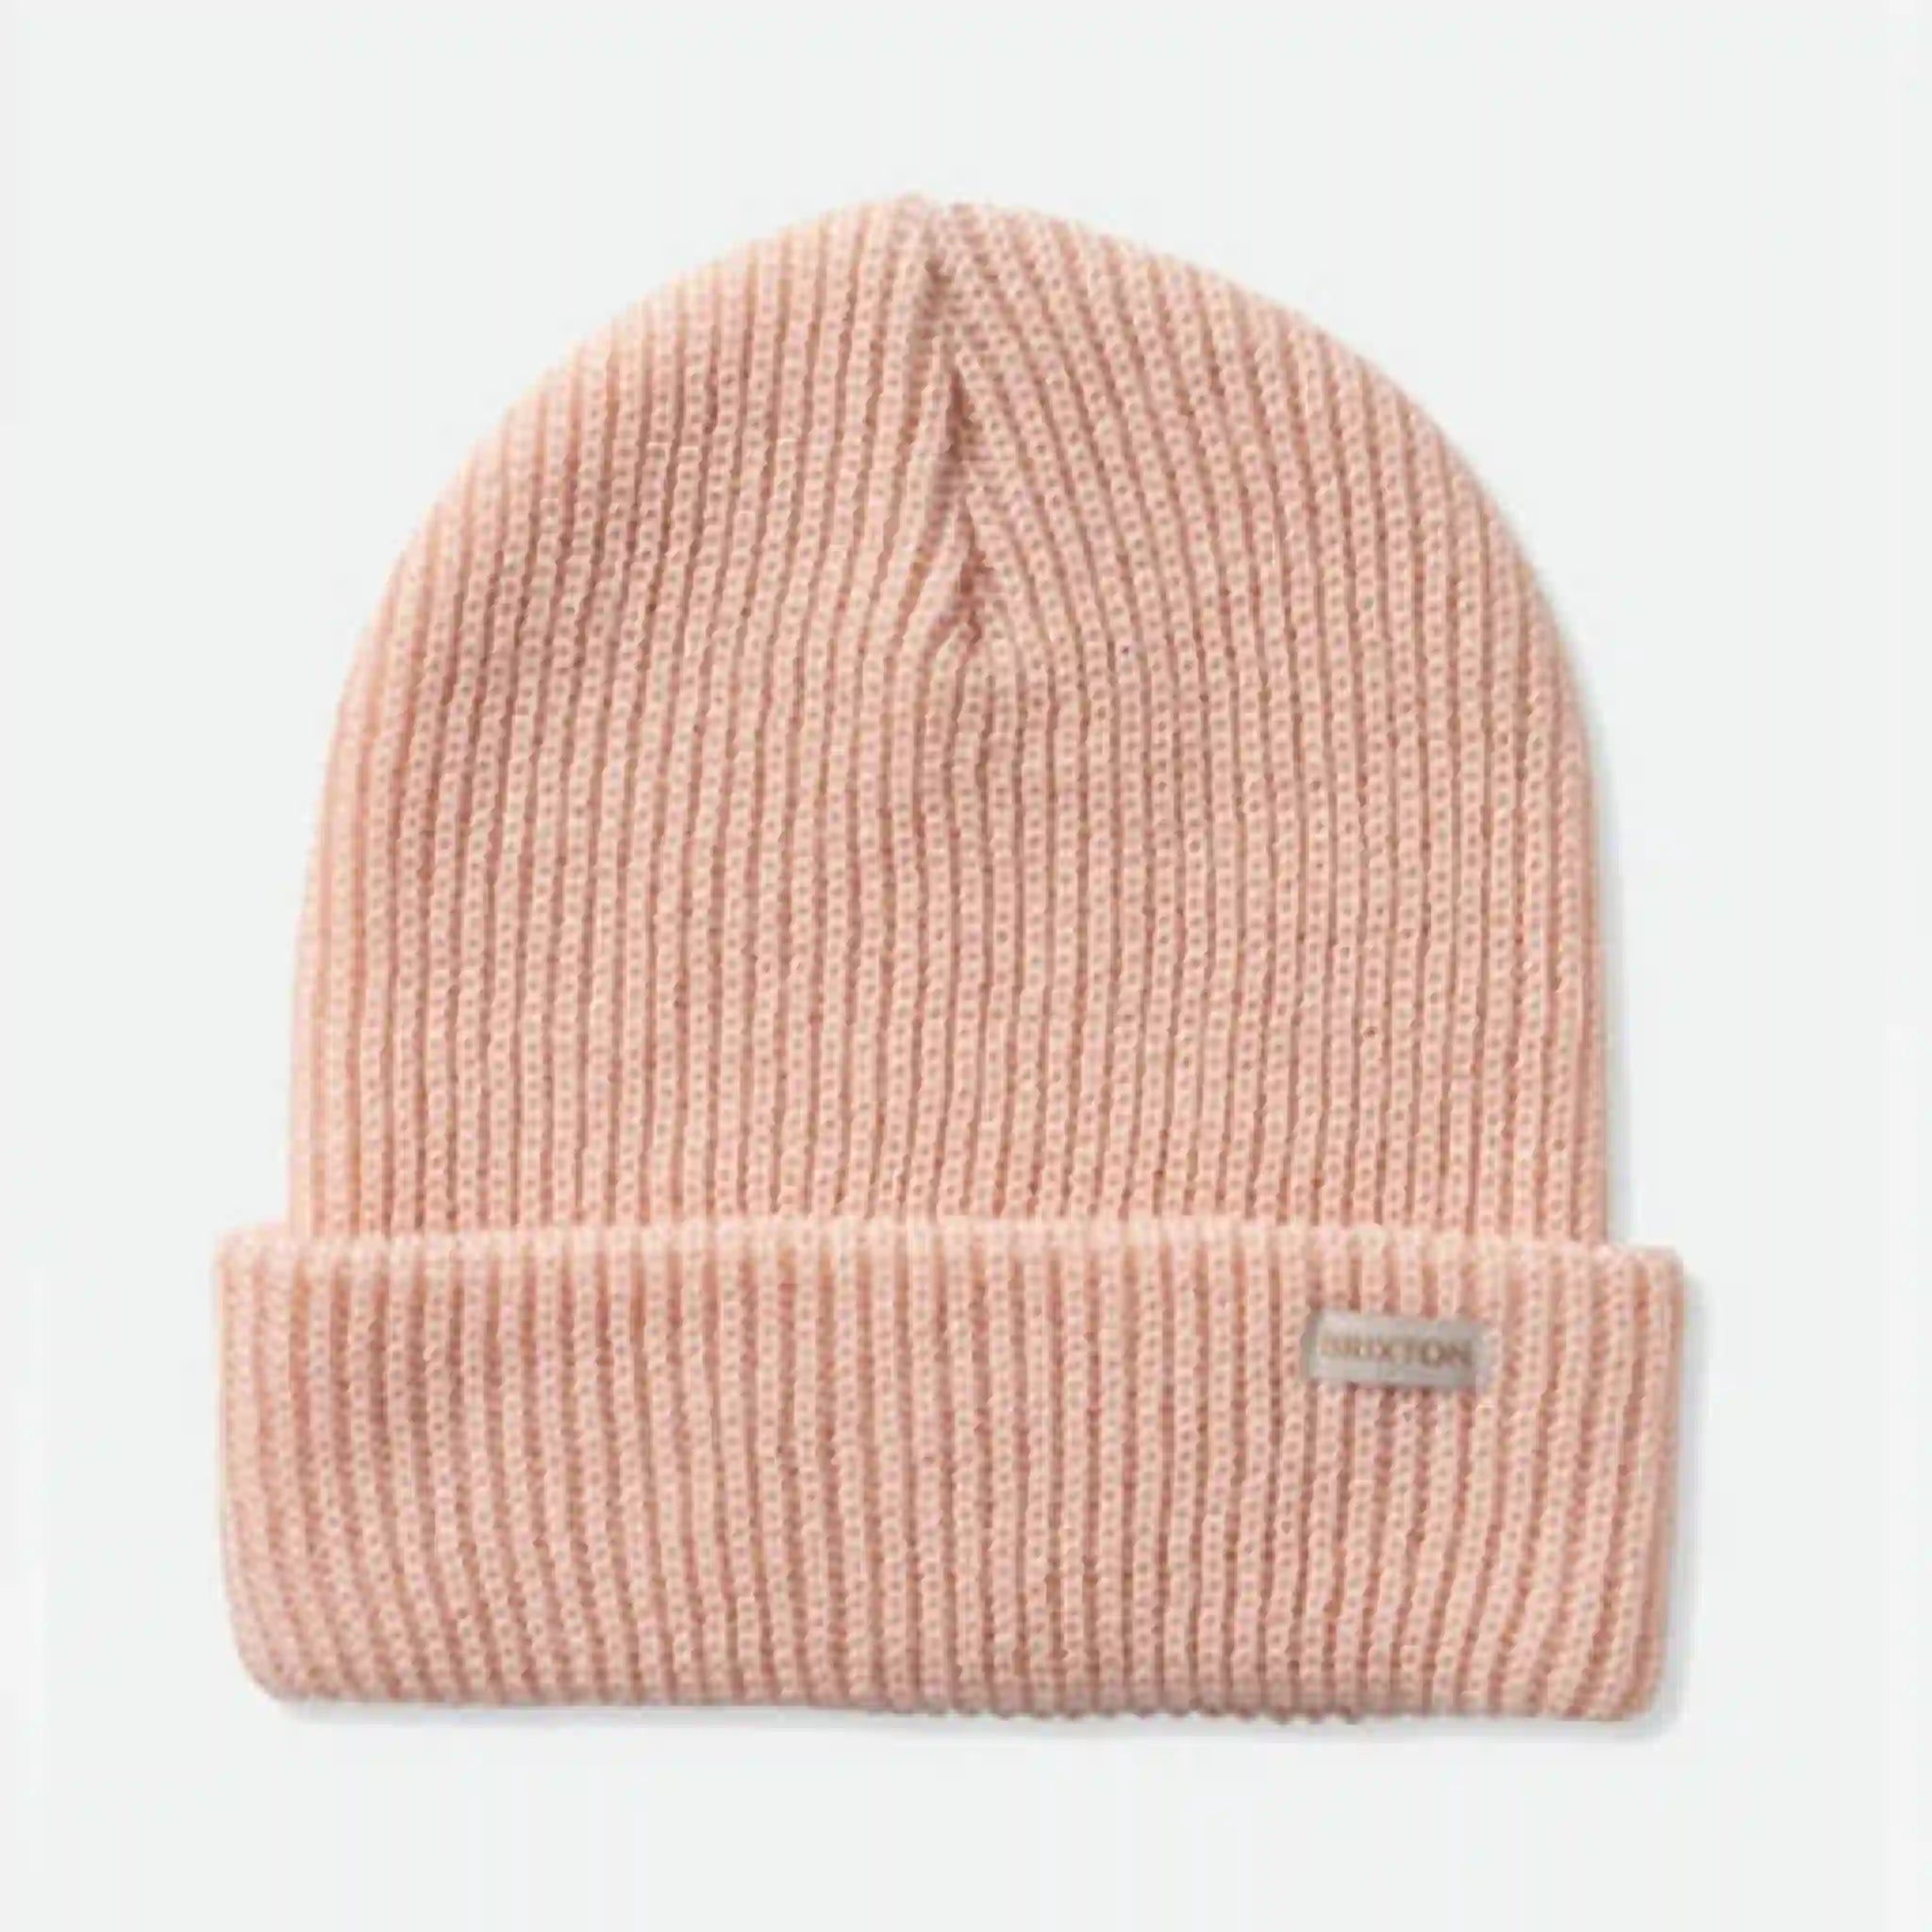 On a white background is a light pink knit beanie with a small Brixton logo tag on the bottom right. 